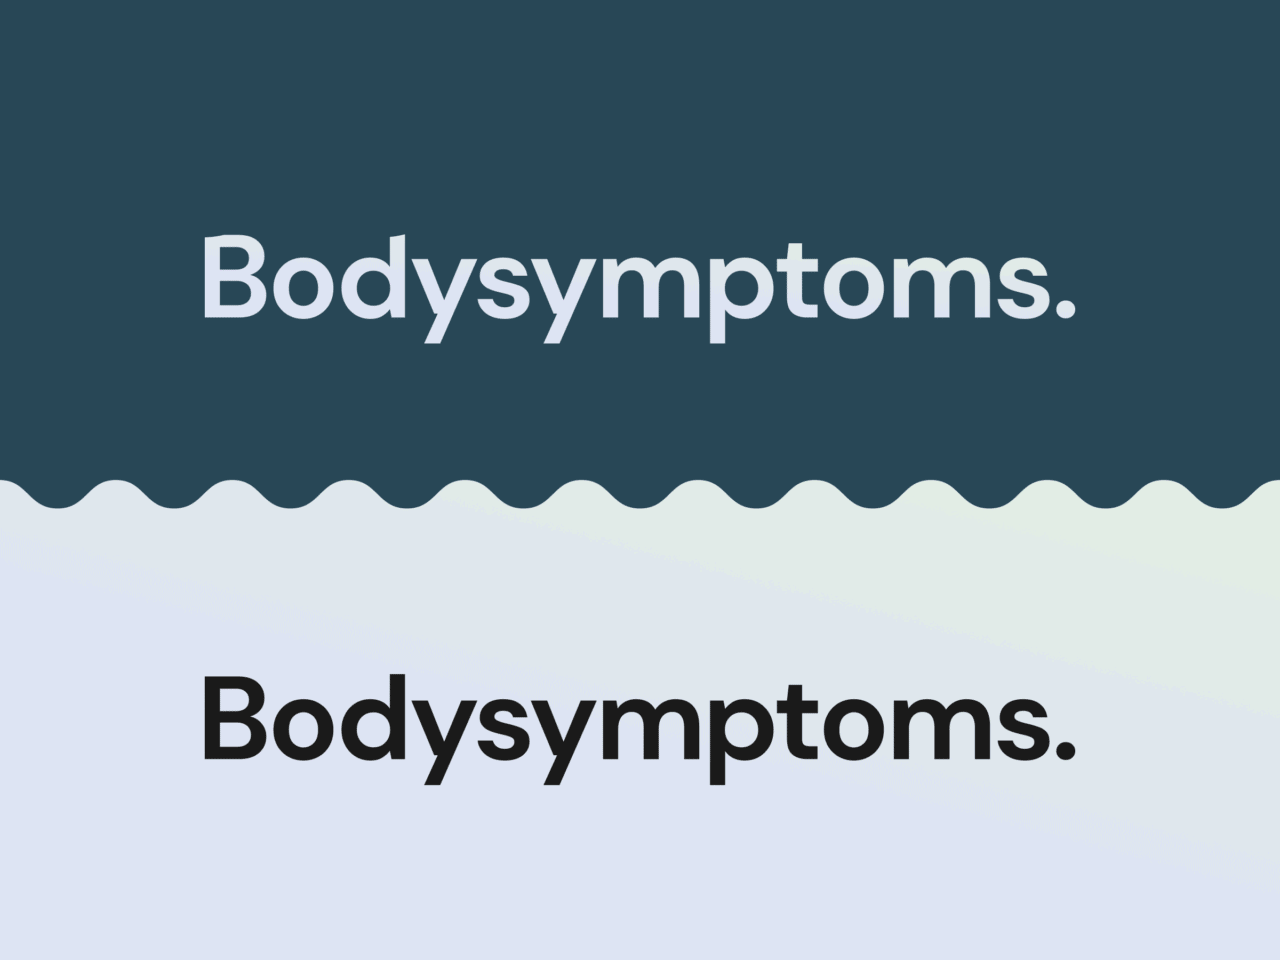 Bodysymptoms sans serif title font and high contrast blues, displayed in two versions